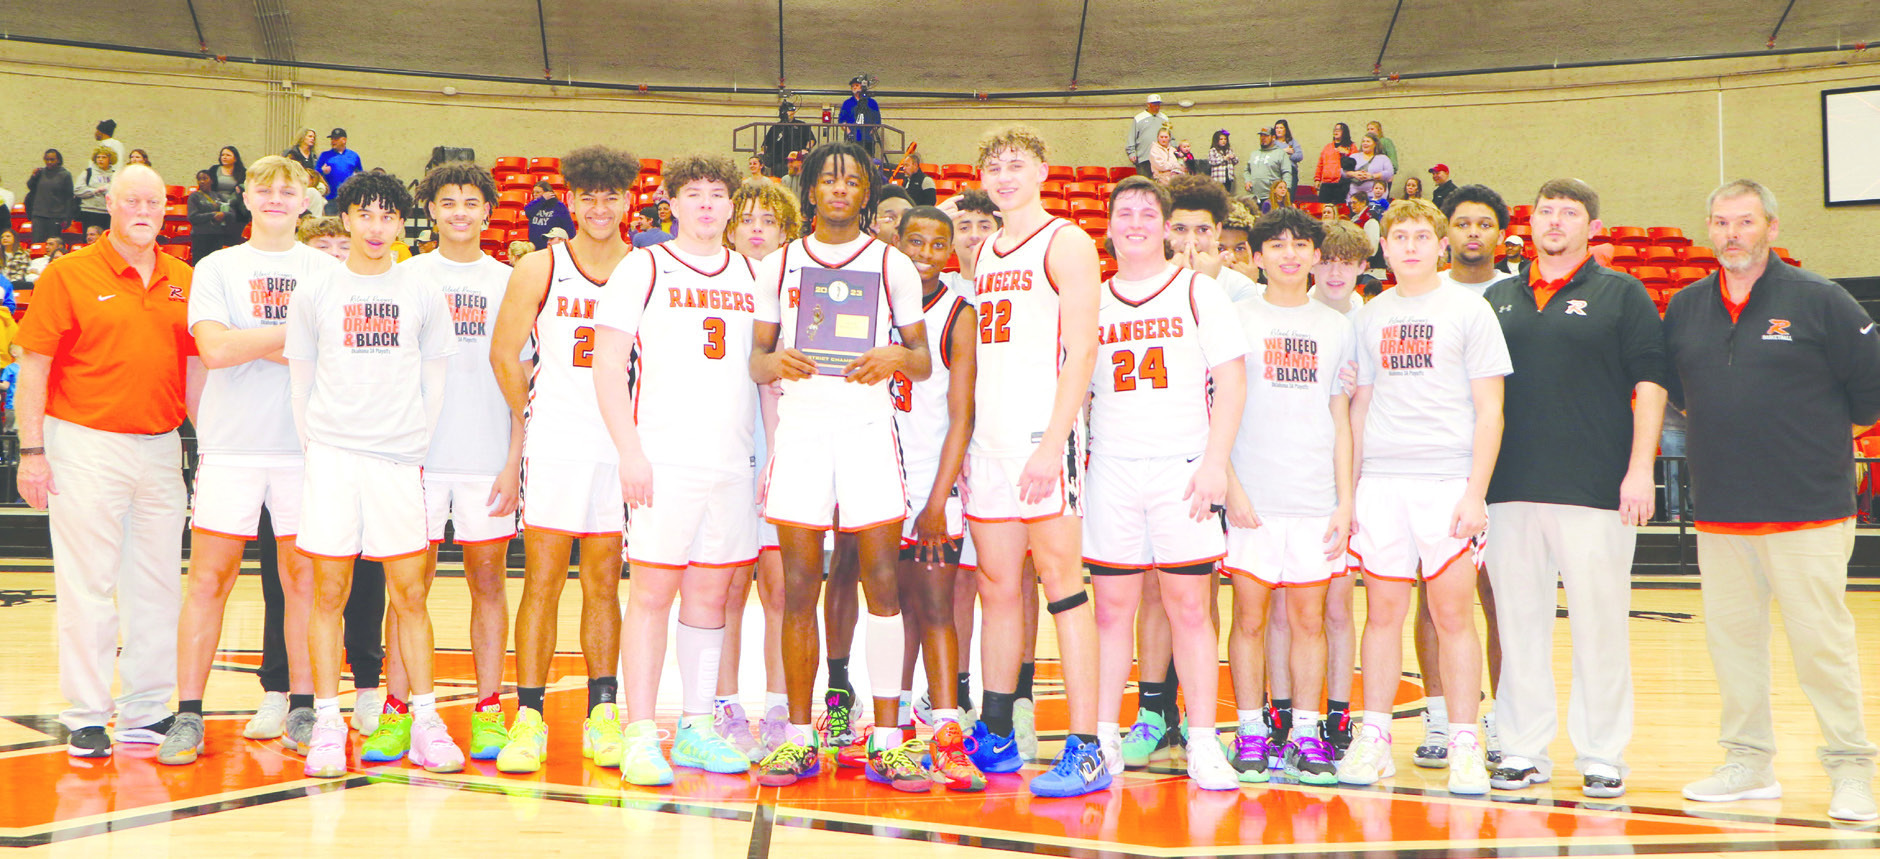 The Roland boys edged Vian 62-58 in double overtime Saturday night at Roland to claim the Class 3A, Area III, District 2 title. On Thursday at Roland the Rangers meet Stigler at 6:30 p.m. in a regional semifinal game and the Vian Wolverines play Eufaula at 3 p.m. in a regional consolation quarterfinal contest. LEA LESSLEY •TIMES